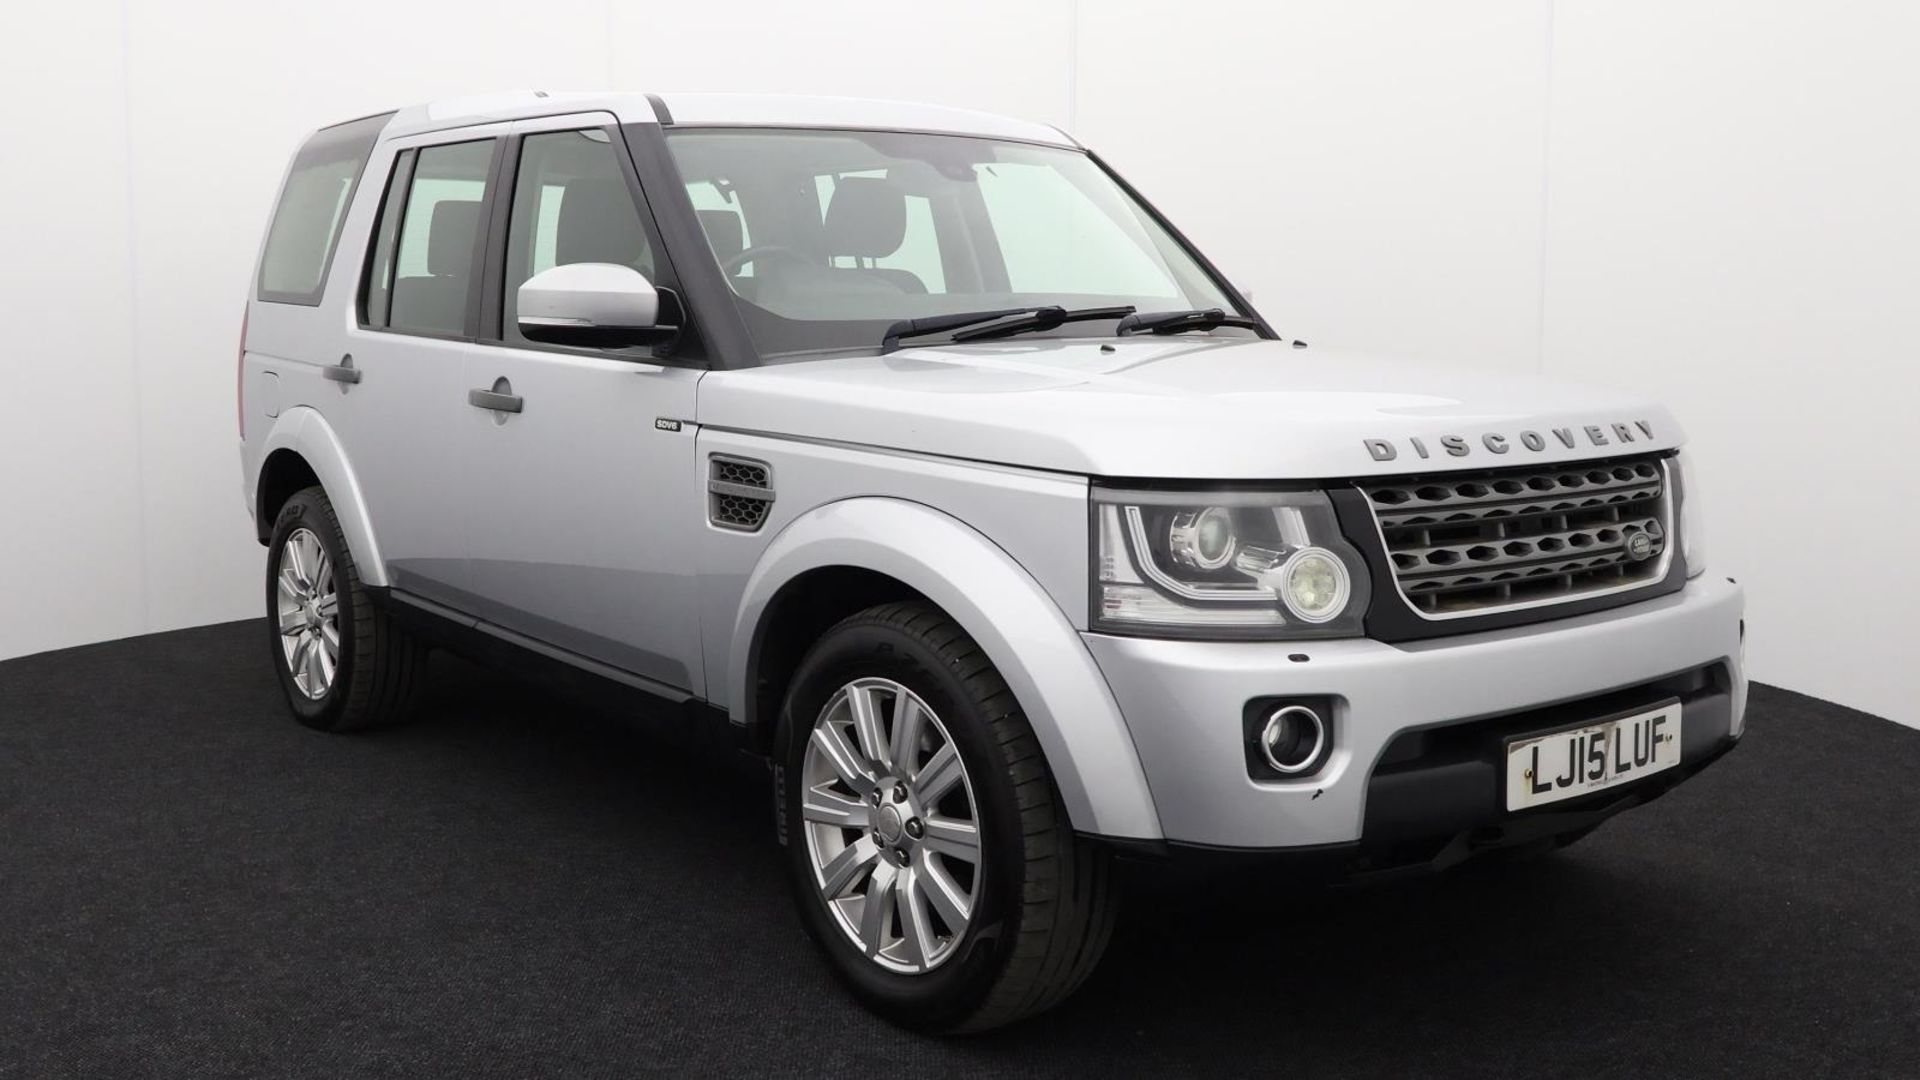 Land Rover Discovery SDV6 SE - 2015 - Automatic - Diesel - 2993cc 6 Cylinder engine - LJ15 LUF - Image 8 of 42